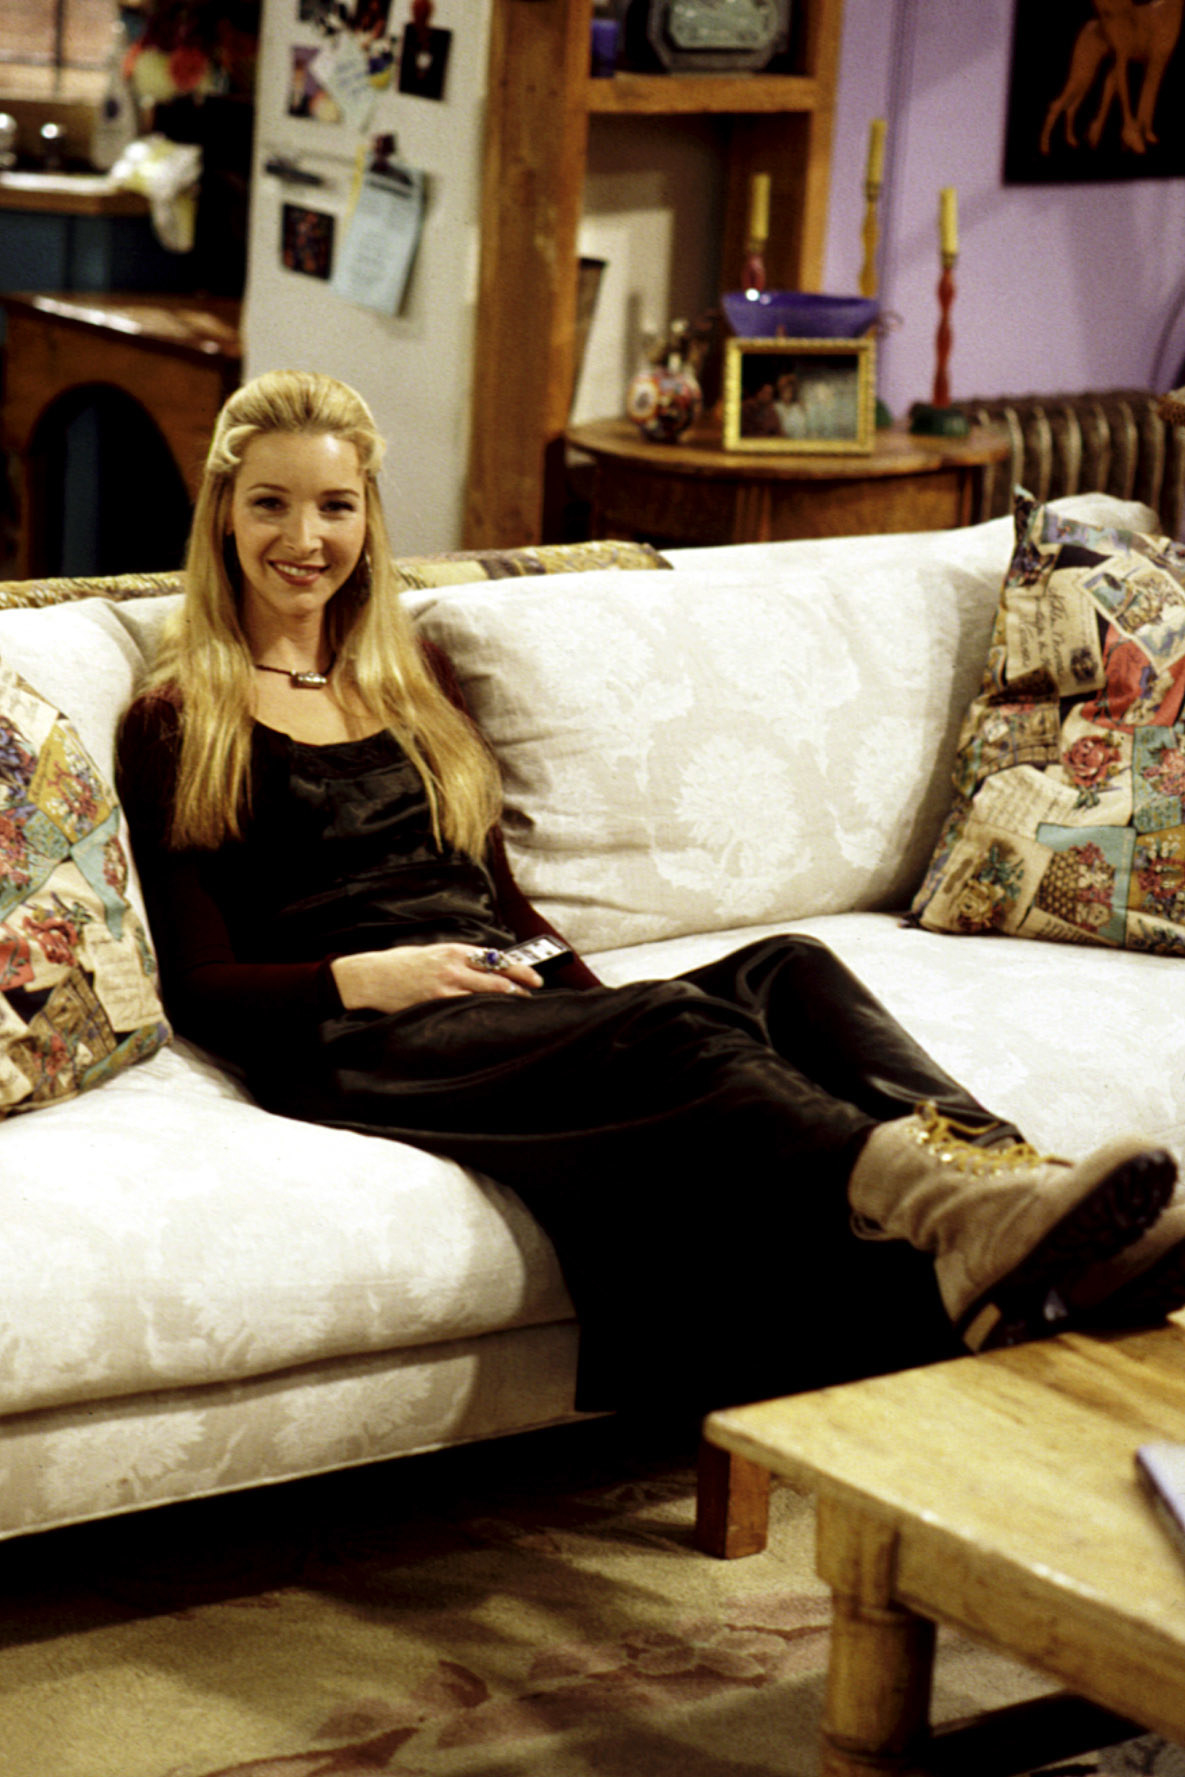 Phoebe sitting on a couch